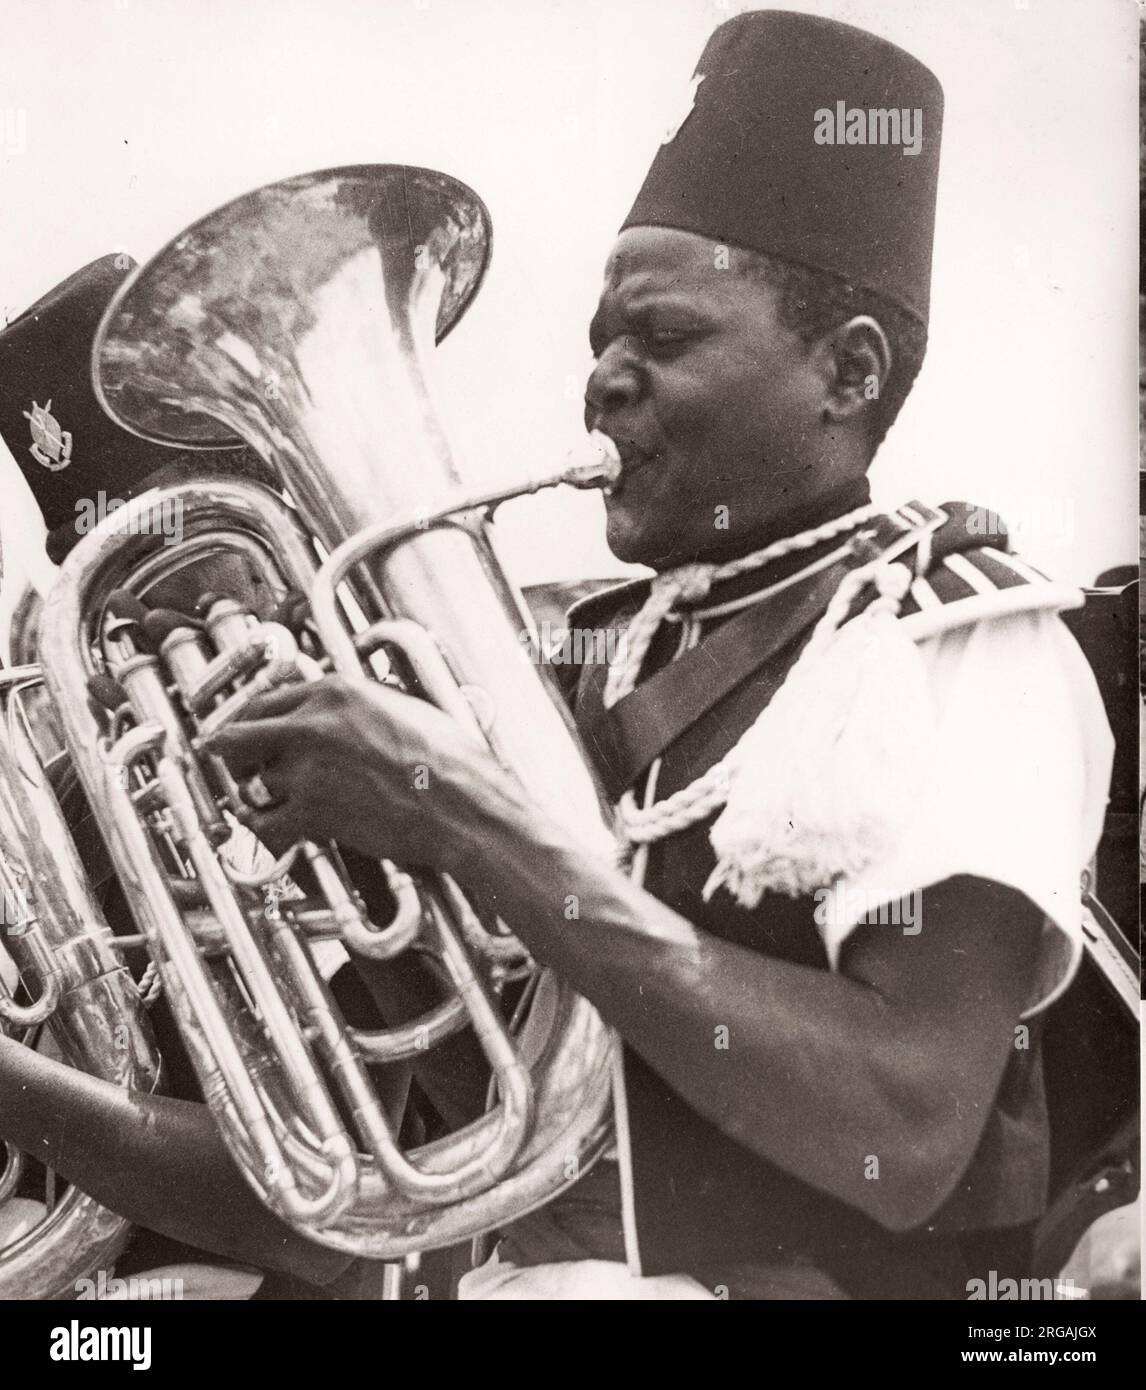 1940s East Africa army - bandsman musician Photograph by a British army recruitment officer stationed in East Africa and the Middle East during World War II Stock Photo